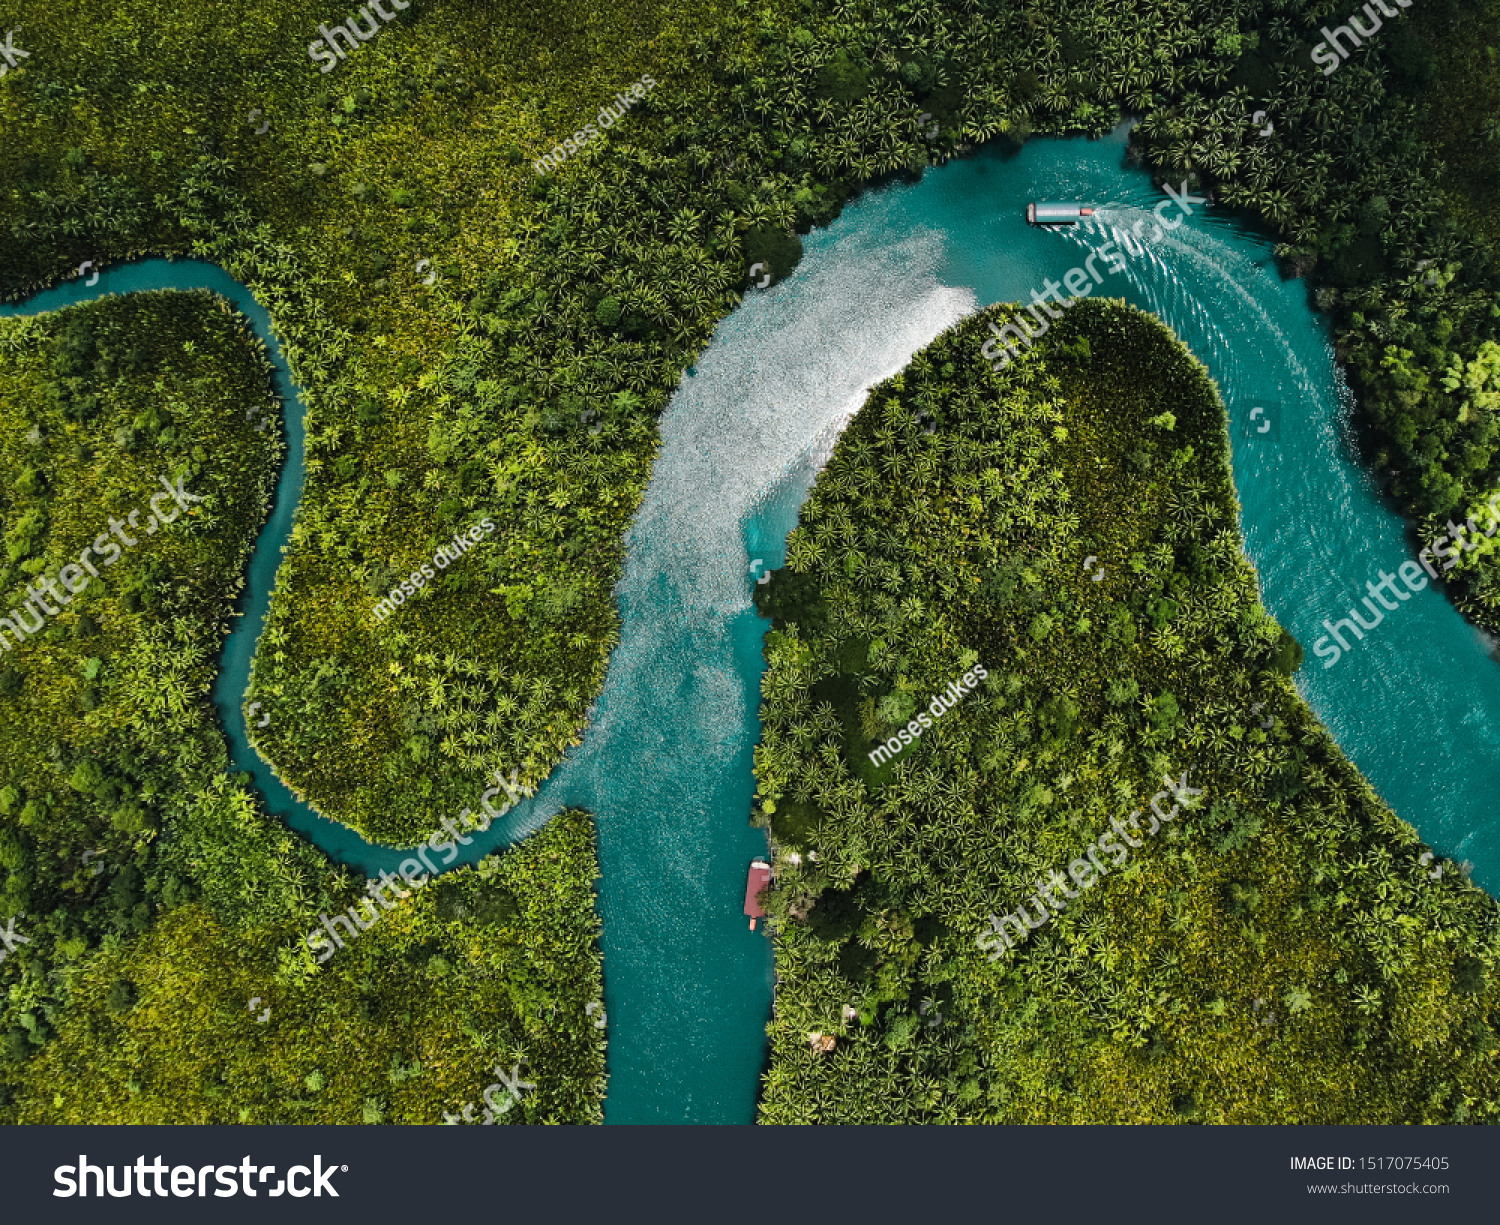 drone aerial birds eye view of a large green grass forest with tall trees and a big blue bendy river flowing through the forest in bohol Island in the Philippines  #1517075405